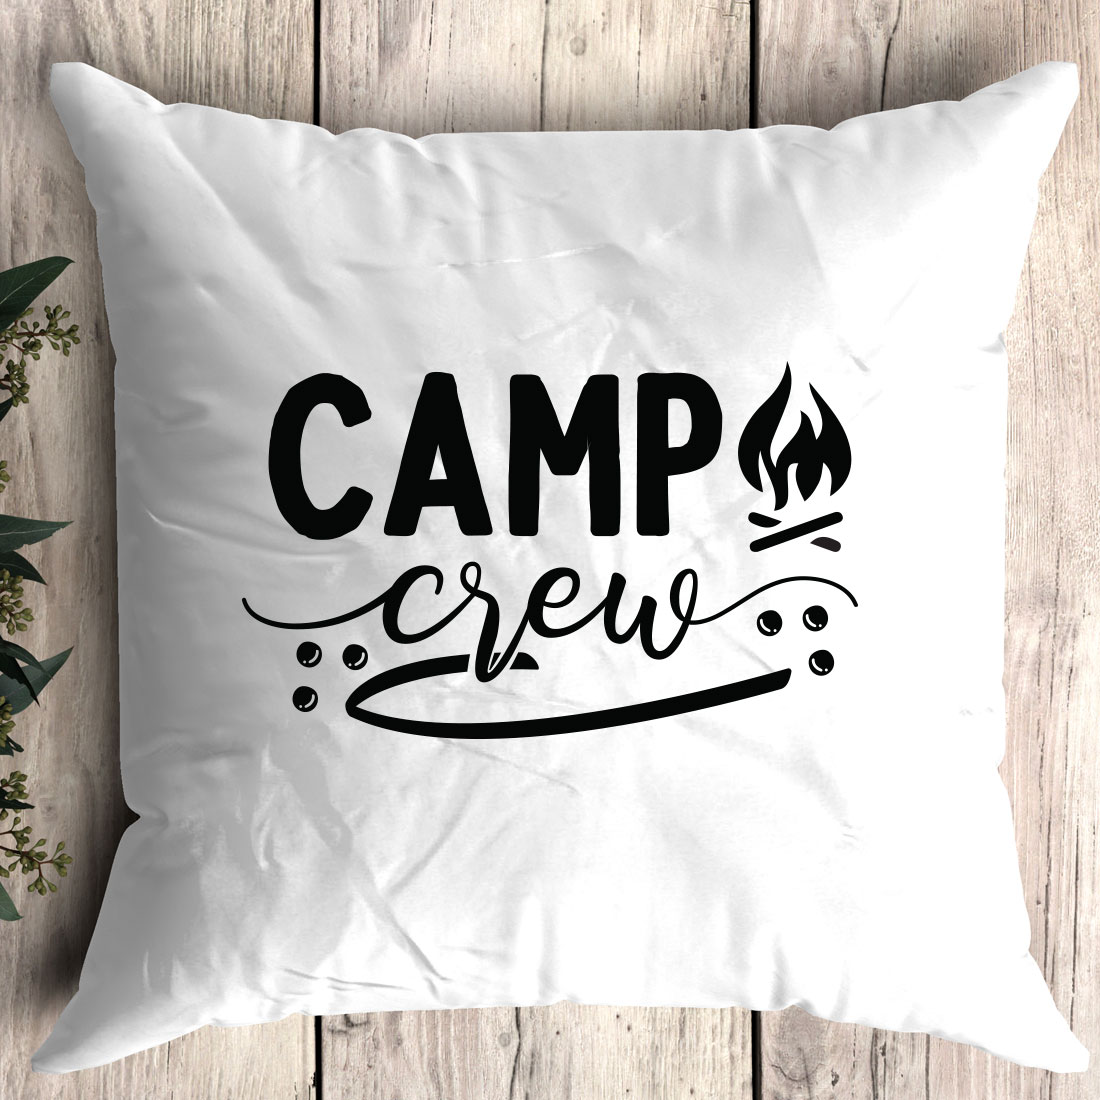 Pillow that says camp crew on it.